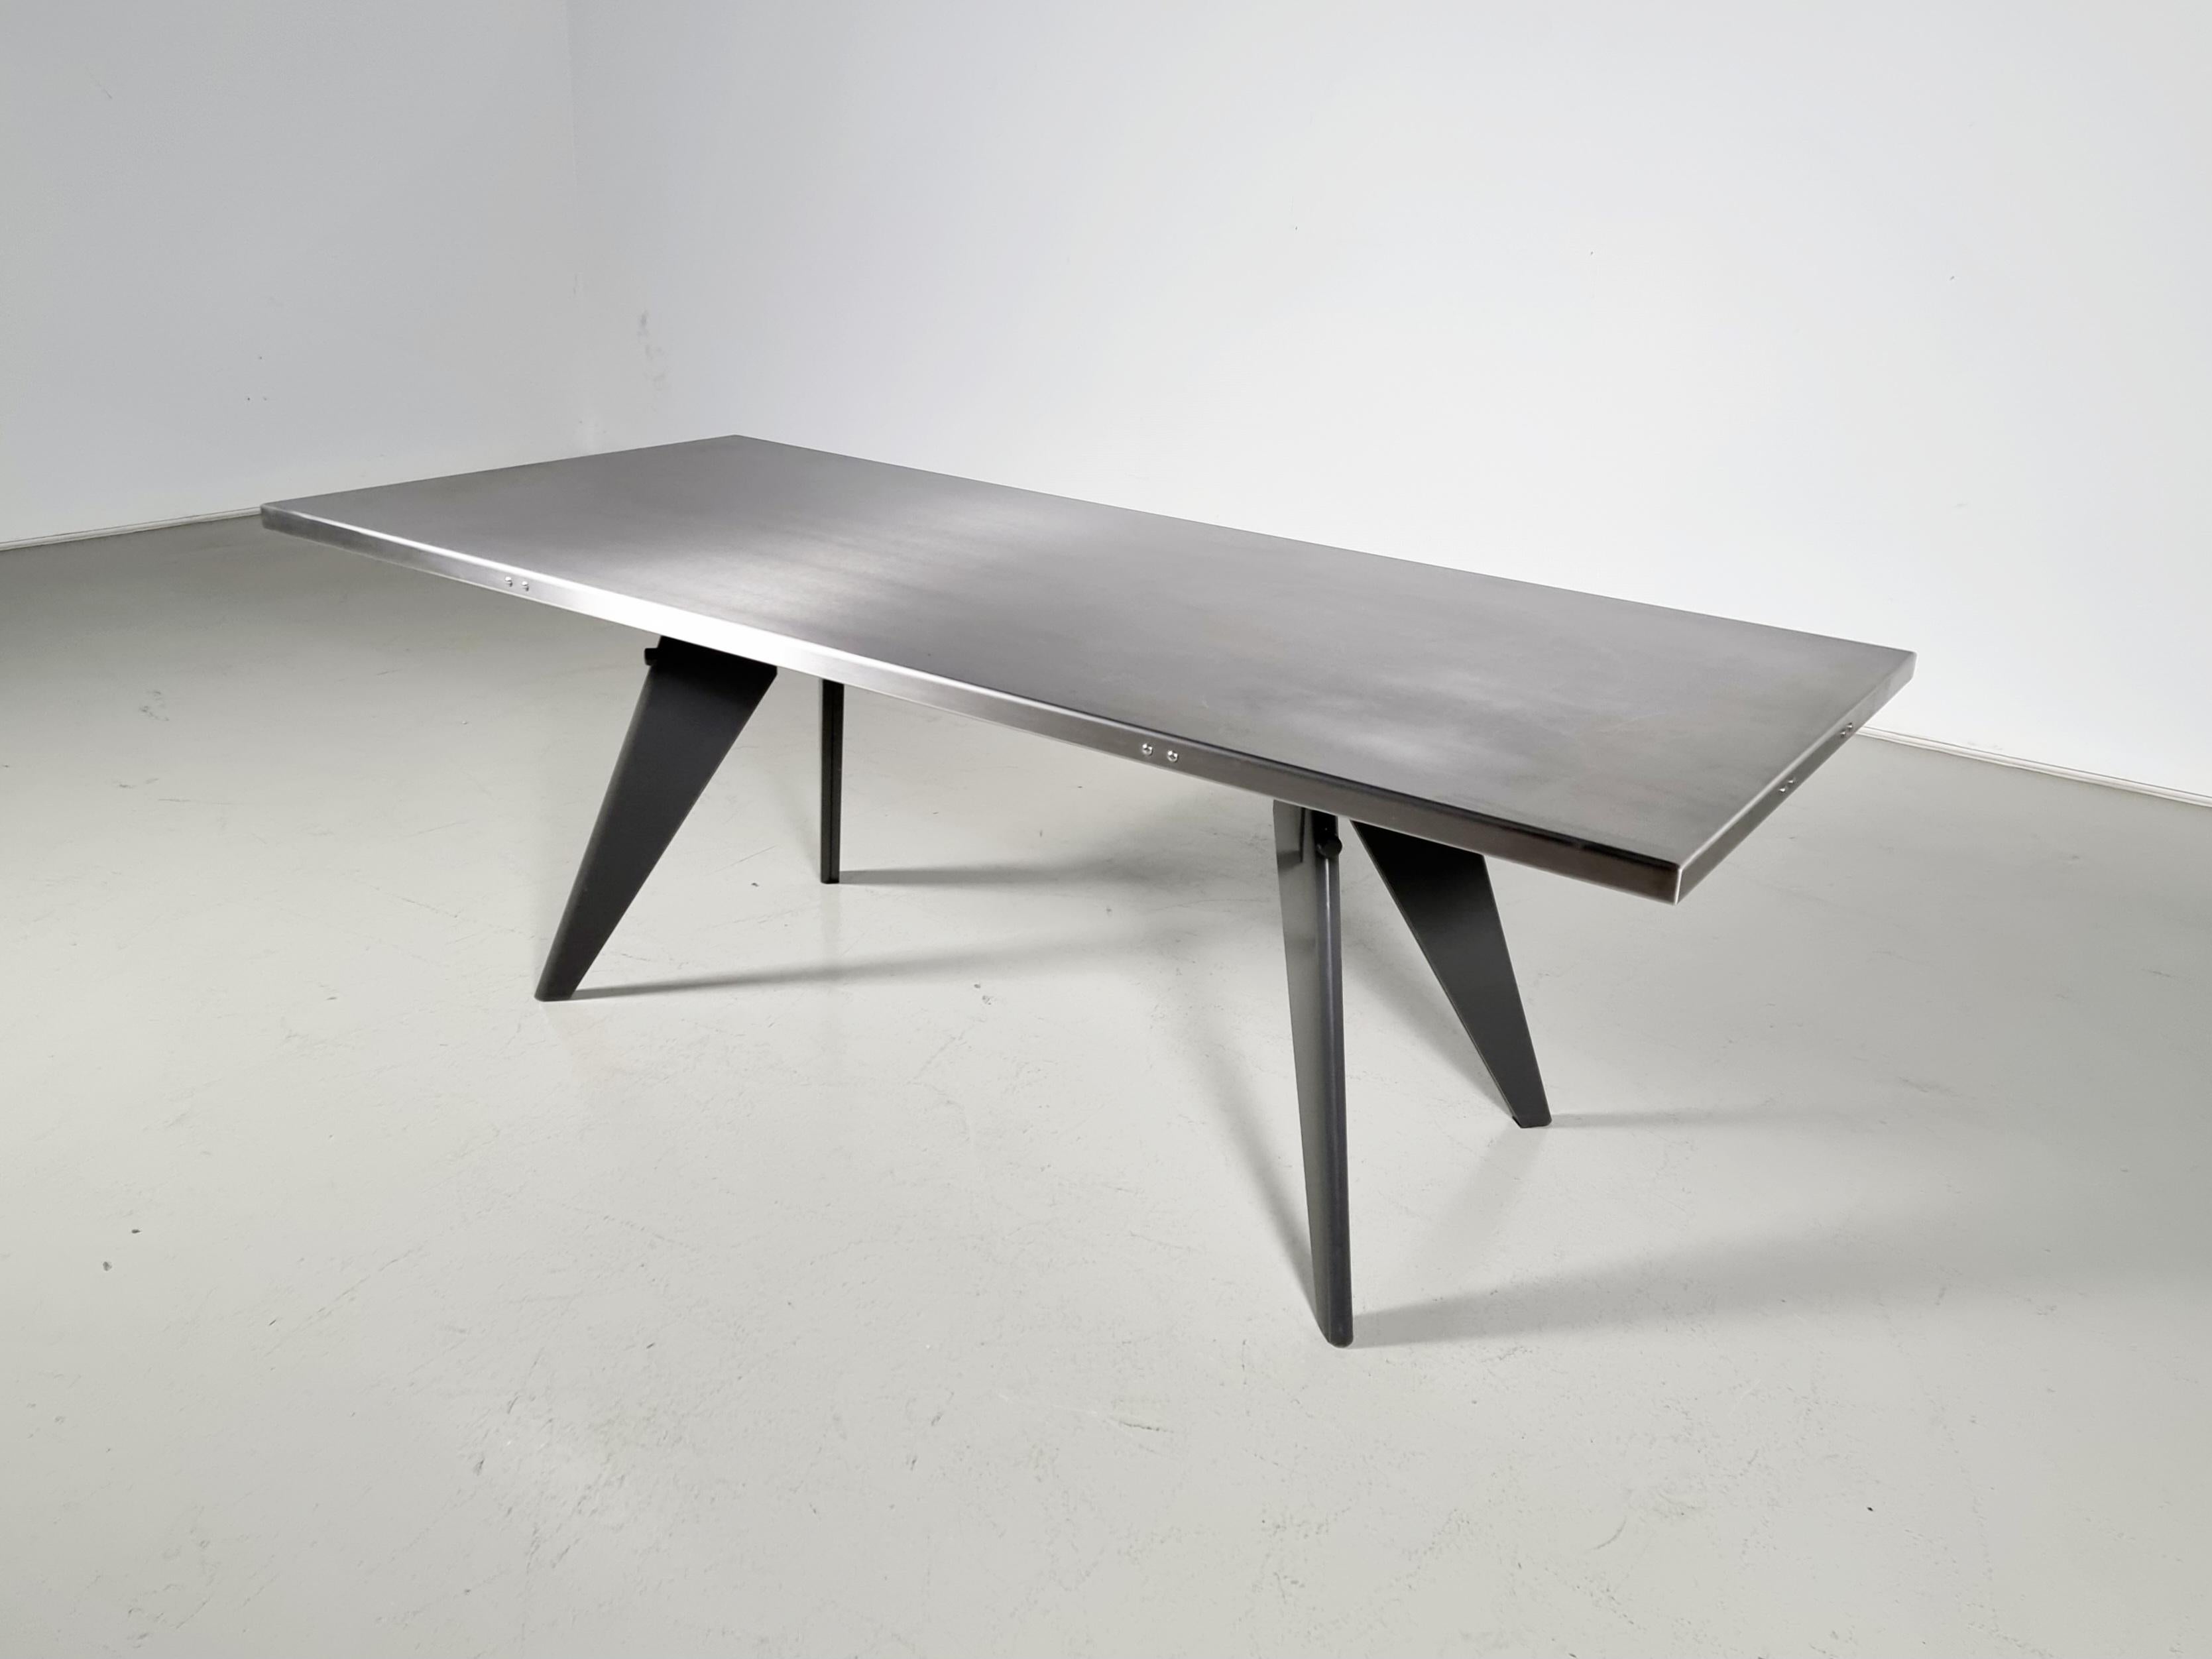 Jean Prouve by G-Star Raw for Vitra S.A.M. Tropique Table with matching chairs For Sale 2